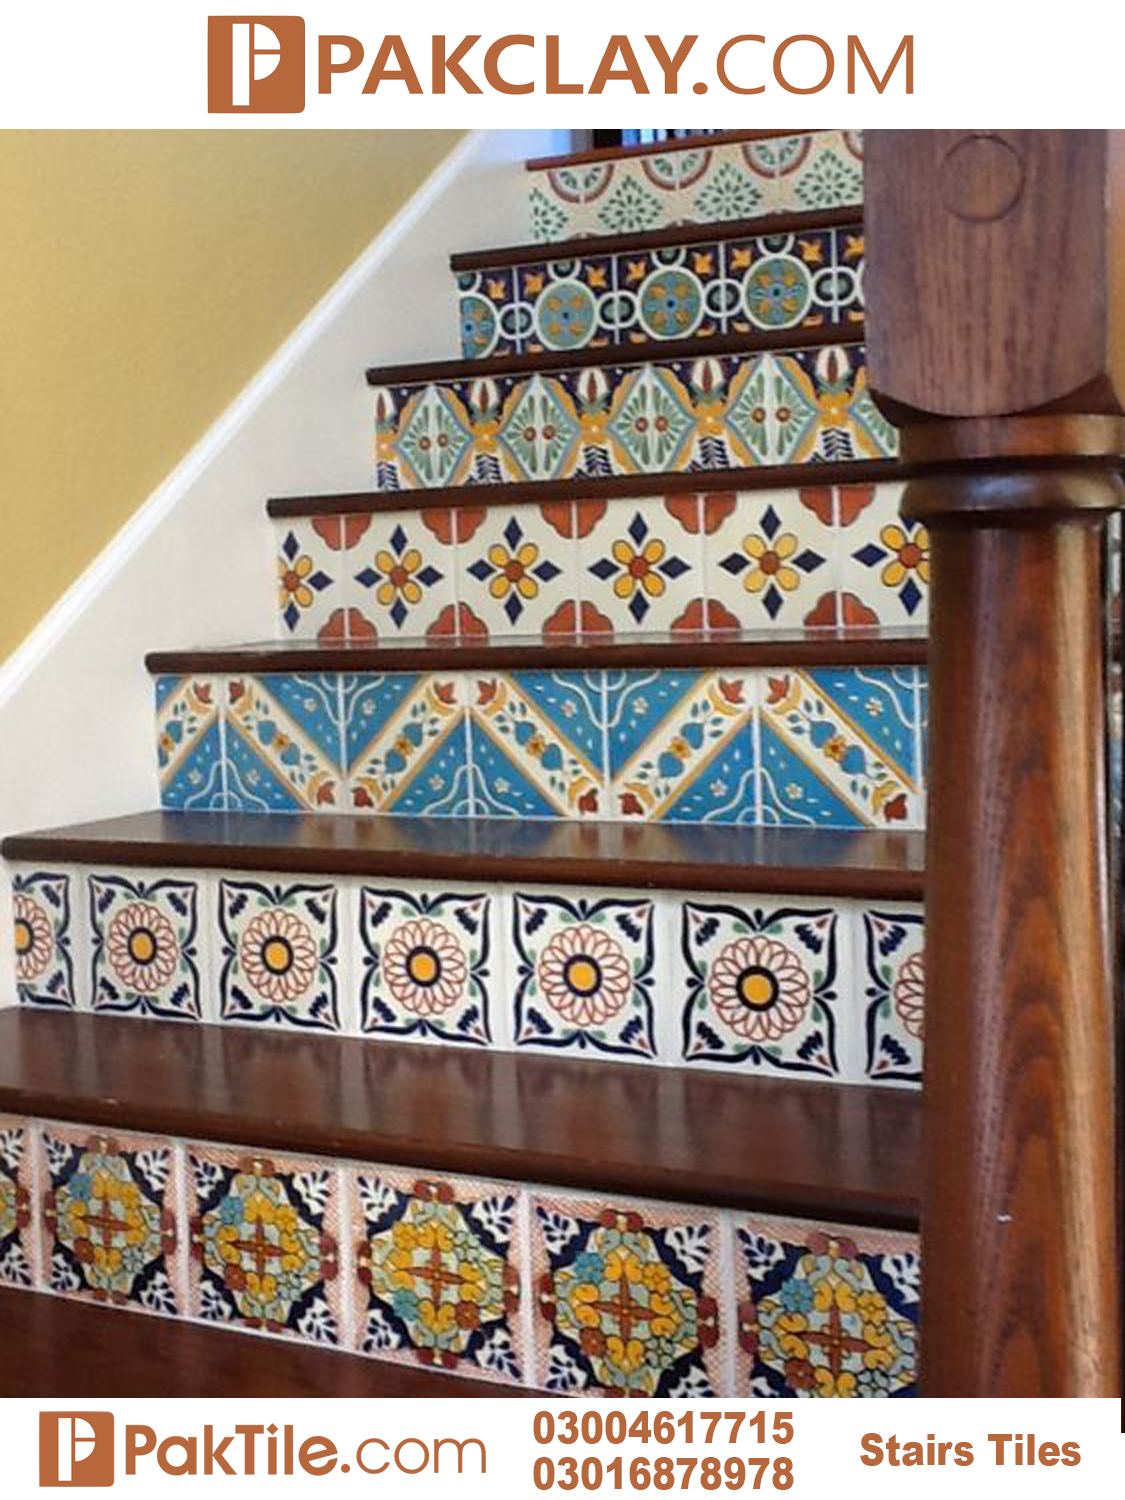 8 Pak Clay Staircase Tiles Design in Islamabad